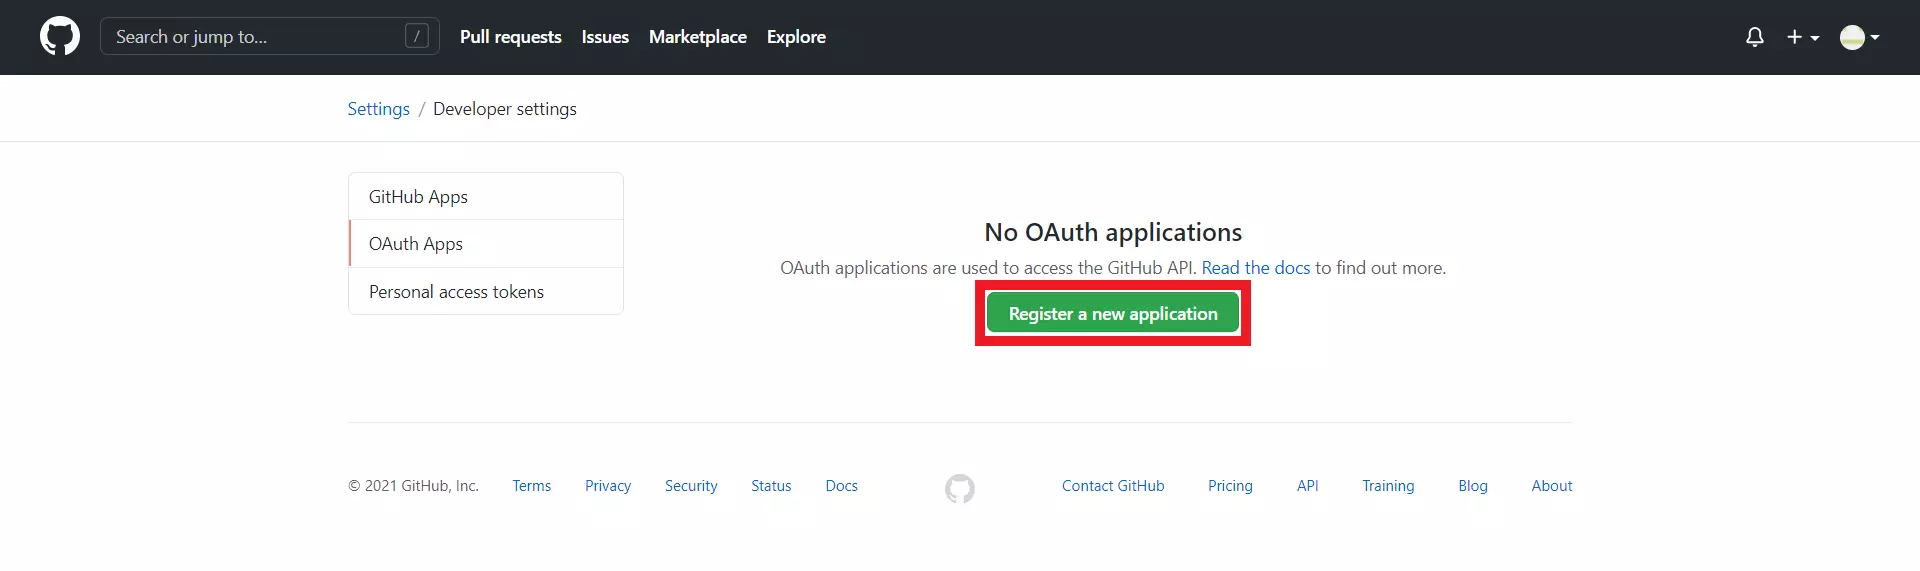 github shopify login click on register a new application